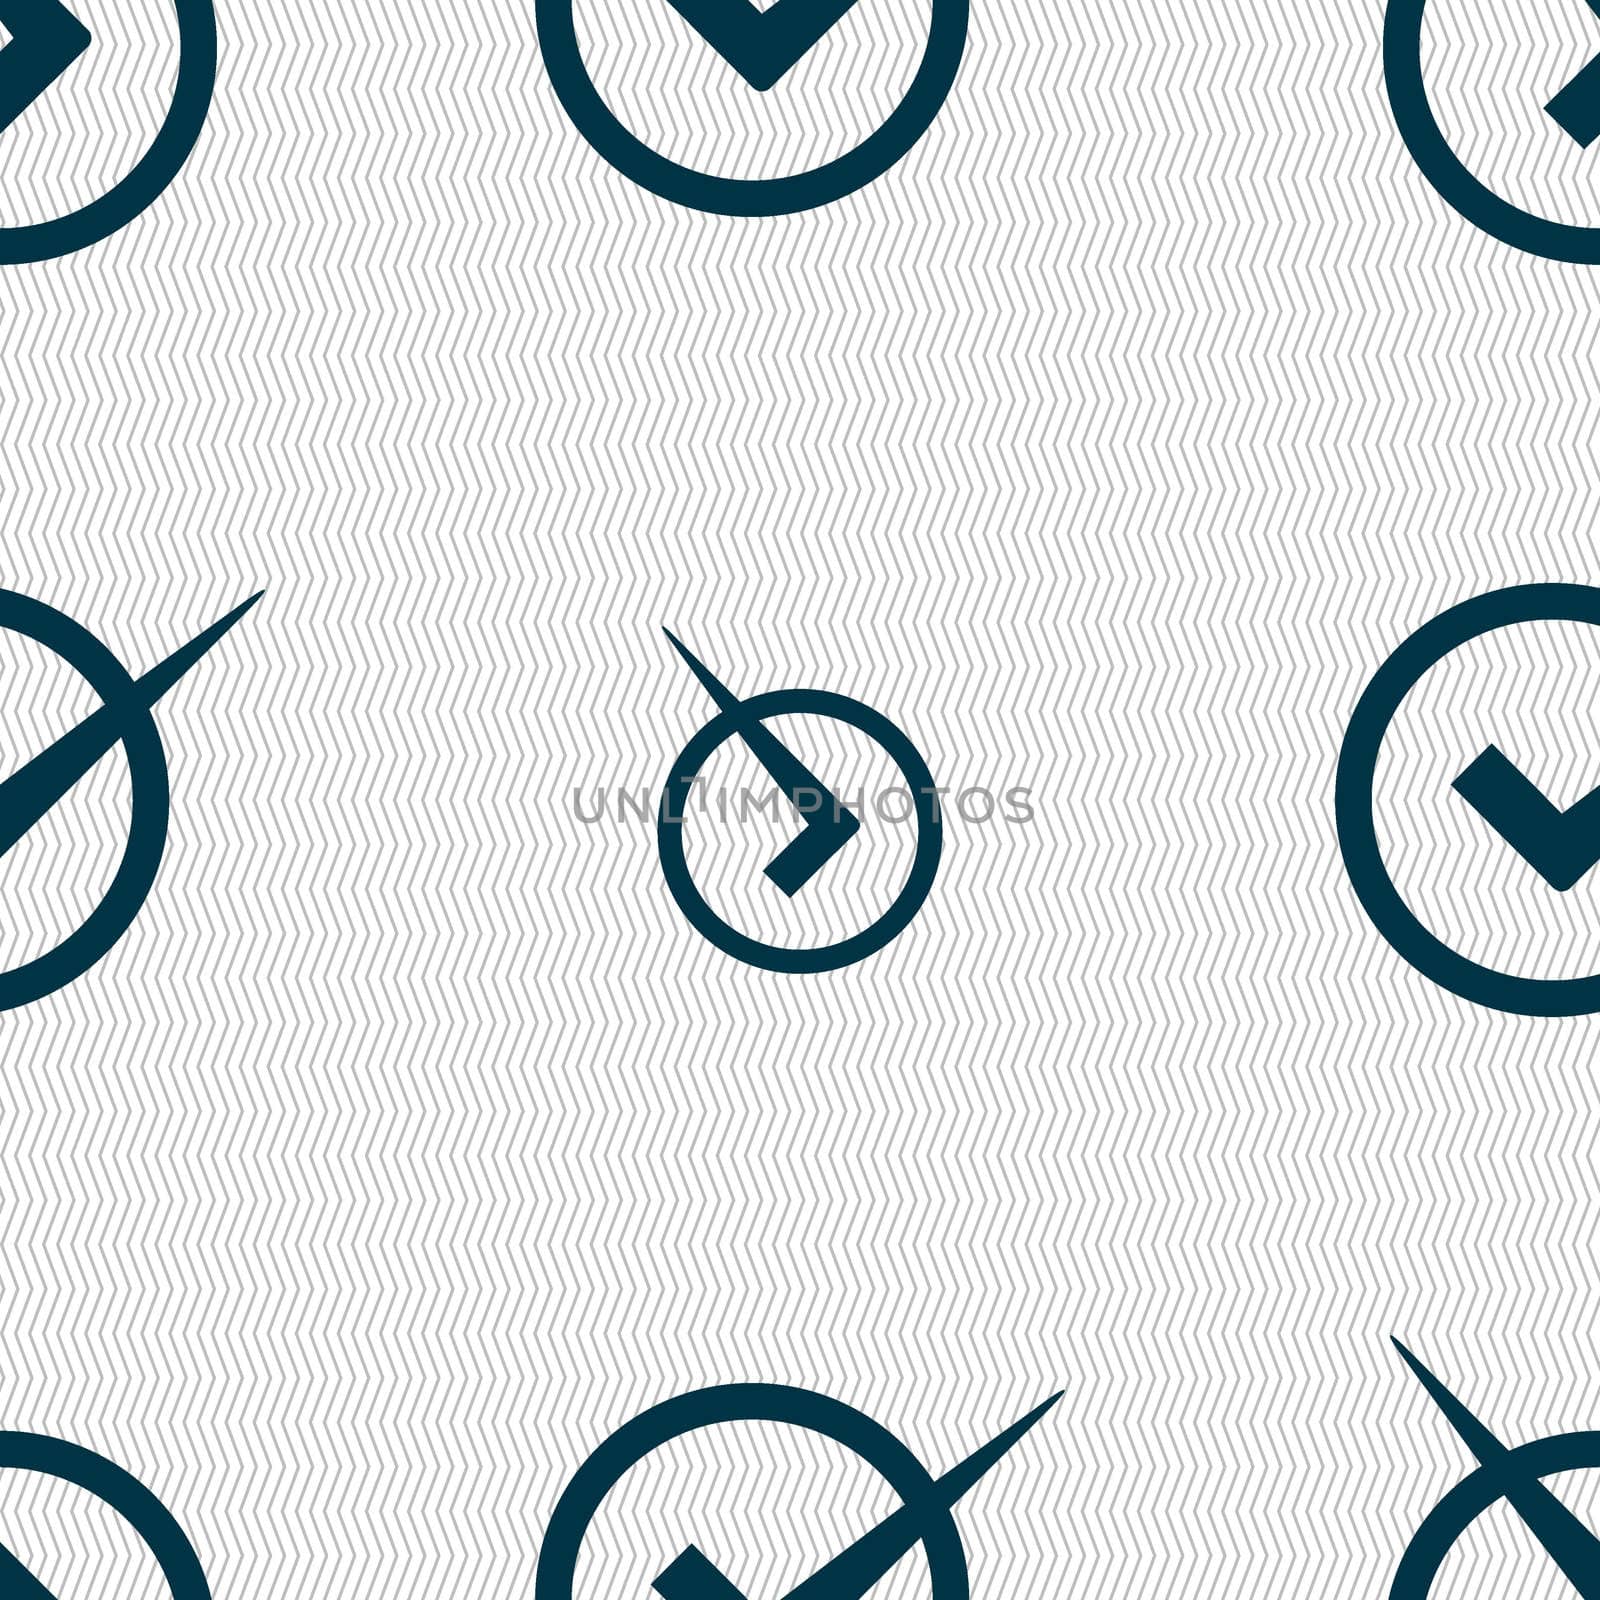 Check mark sign icon. Checkbox button. Seamless abstract background with geometric shapes. illustration